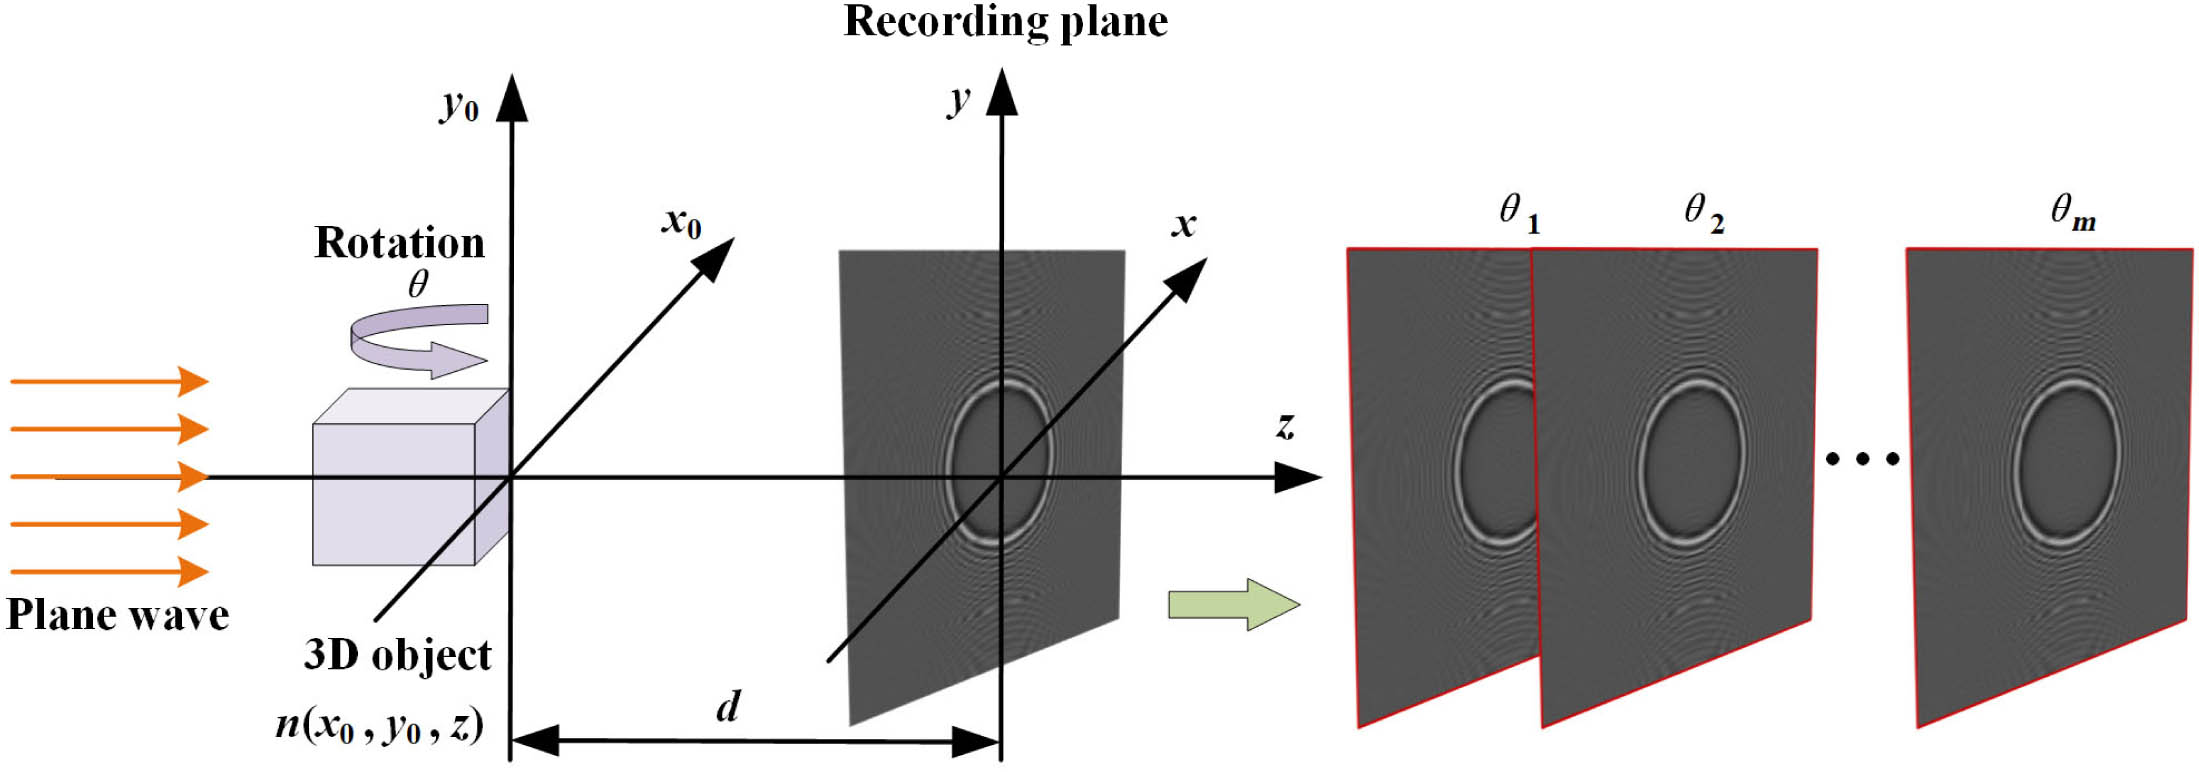 Recording schematic of THz in-line digital hologram at different rotation angles.